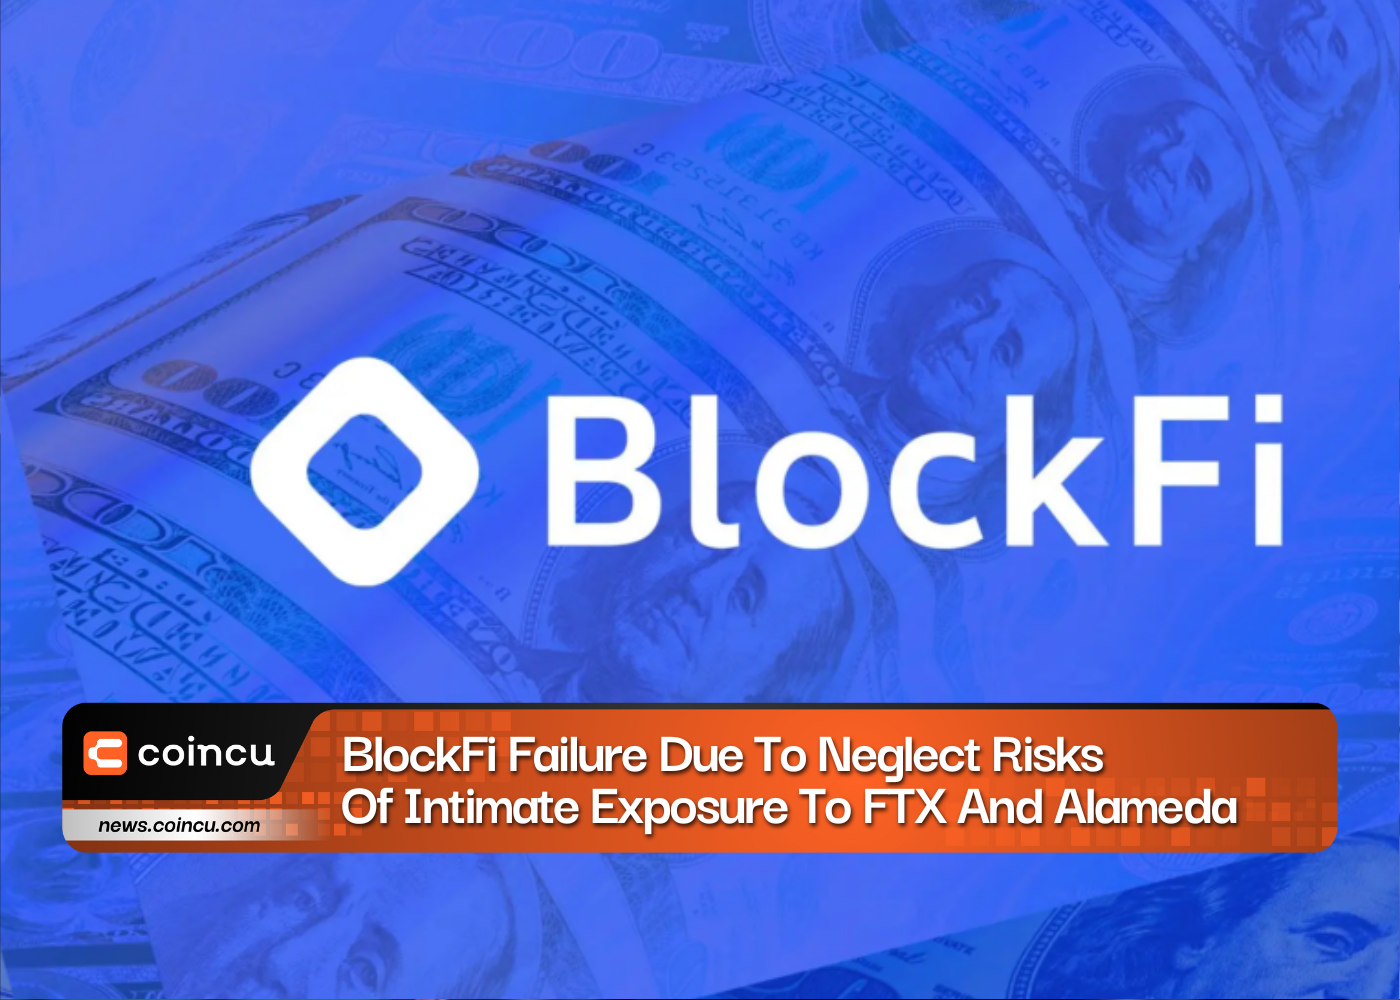 BlockFi Failure Due To Neglect Risks Of Intimate Exposure To FTX And Alameda